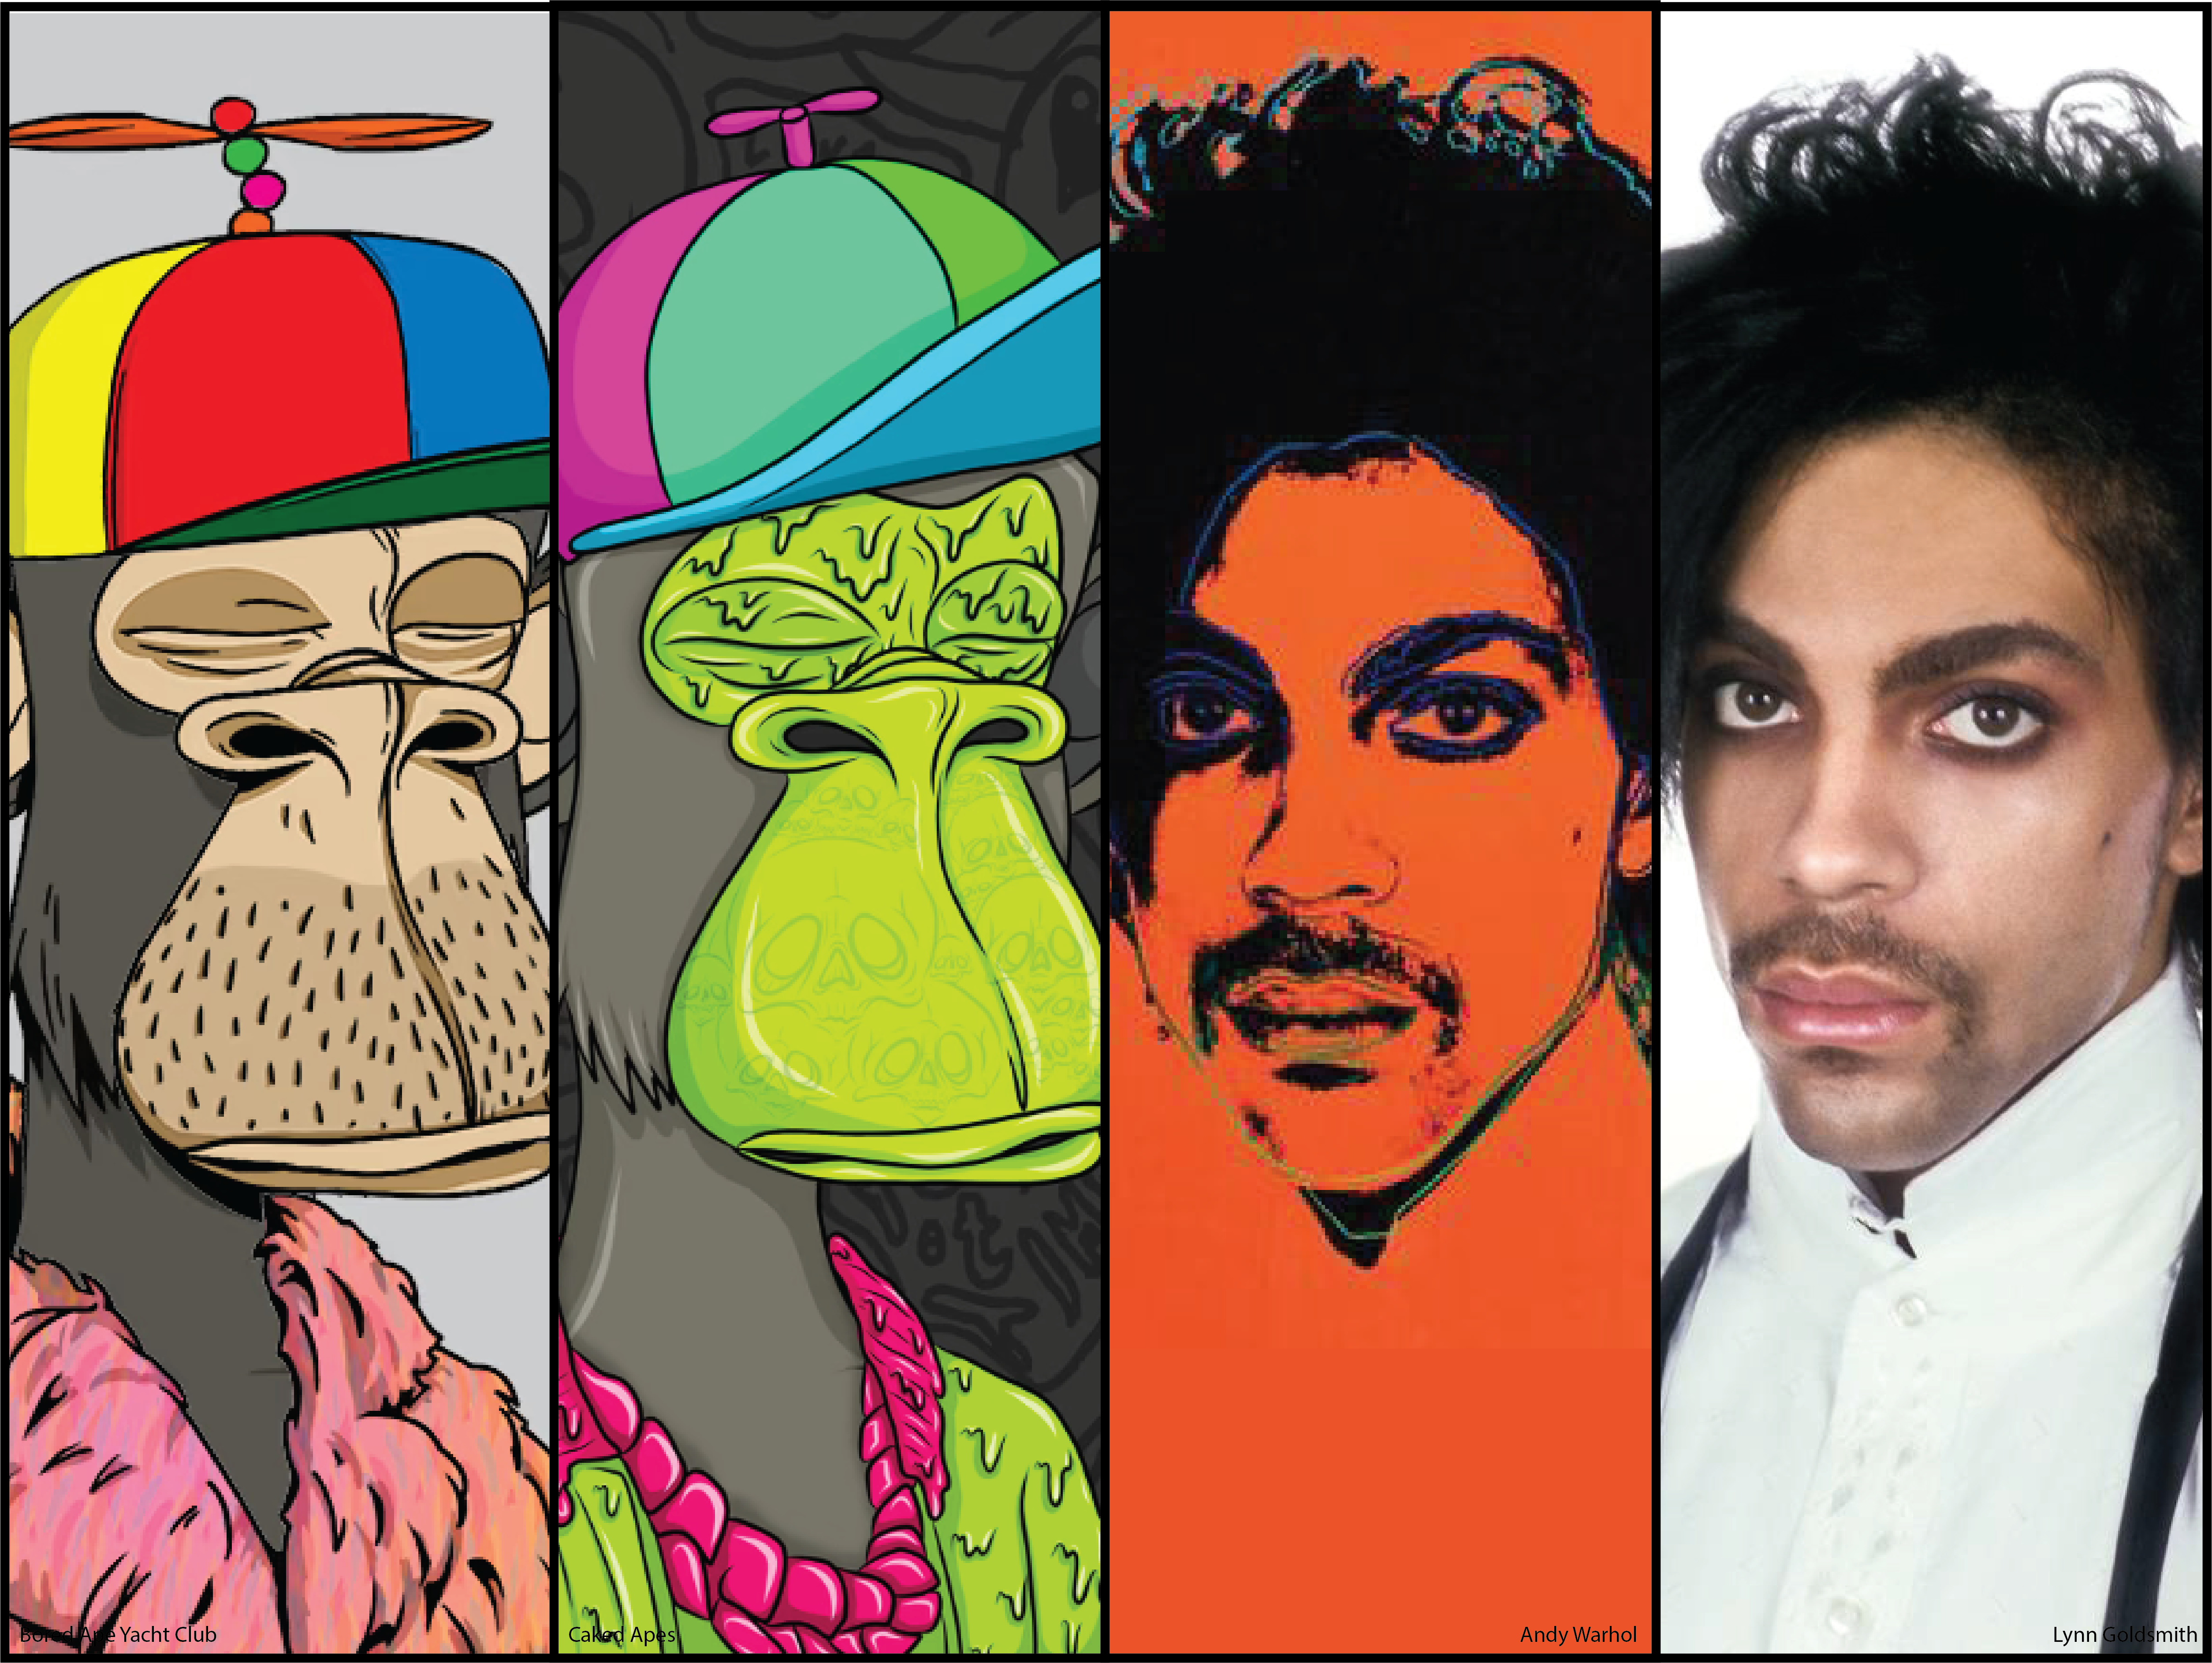 A cover art image depicting (from left to right) Bored Ape Yacht Club #3884 Caked Apes #6224, Andy Warhol's "Orange Prince", and Lynn Goldsmith's photograph of Prince.